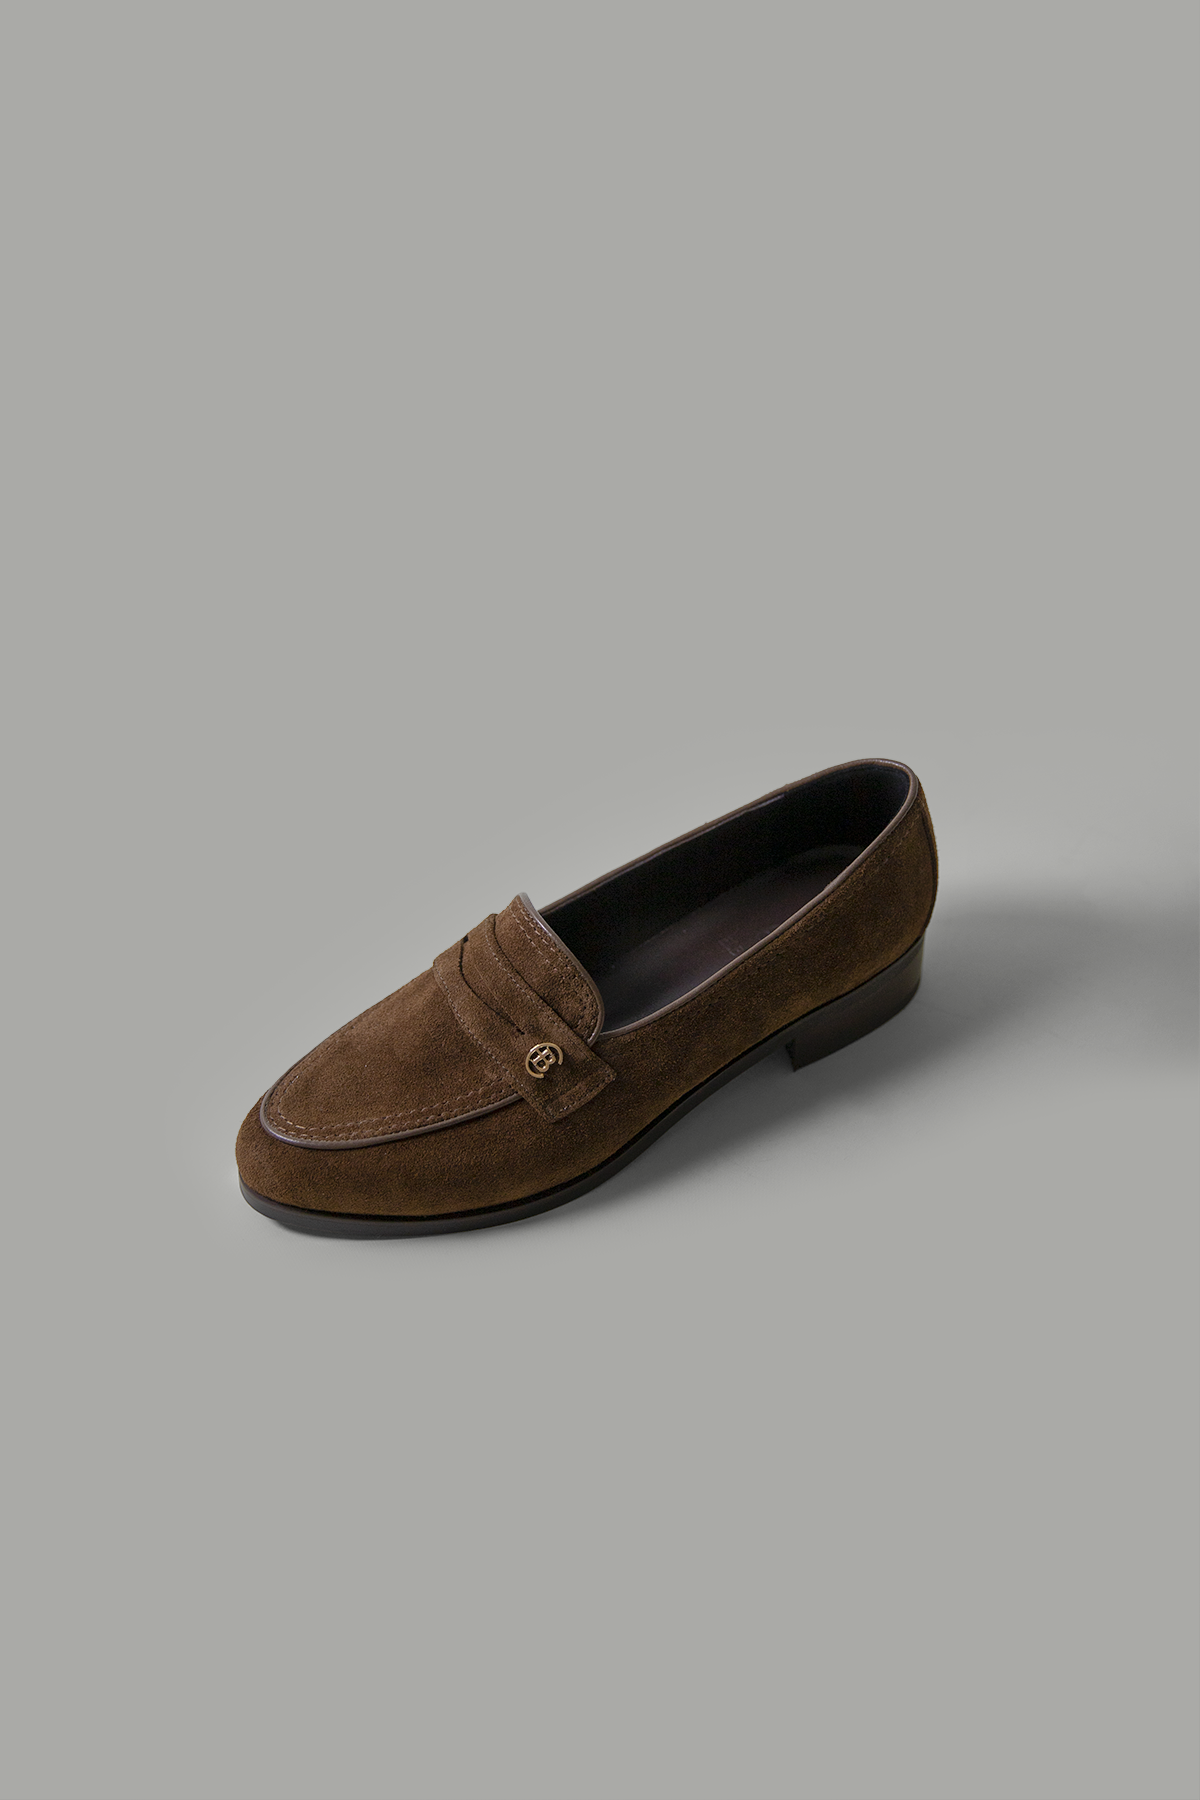 Carla Suede Loafers (Brown)